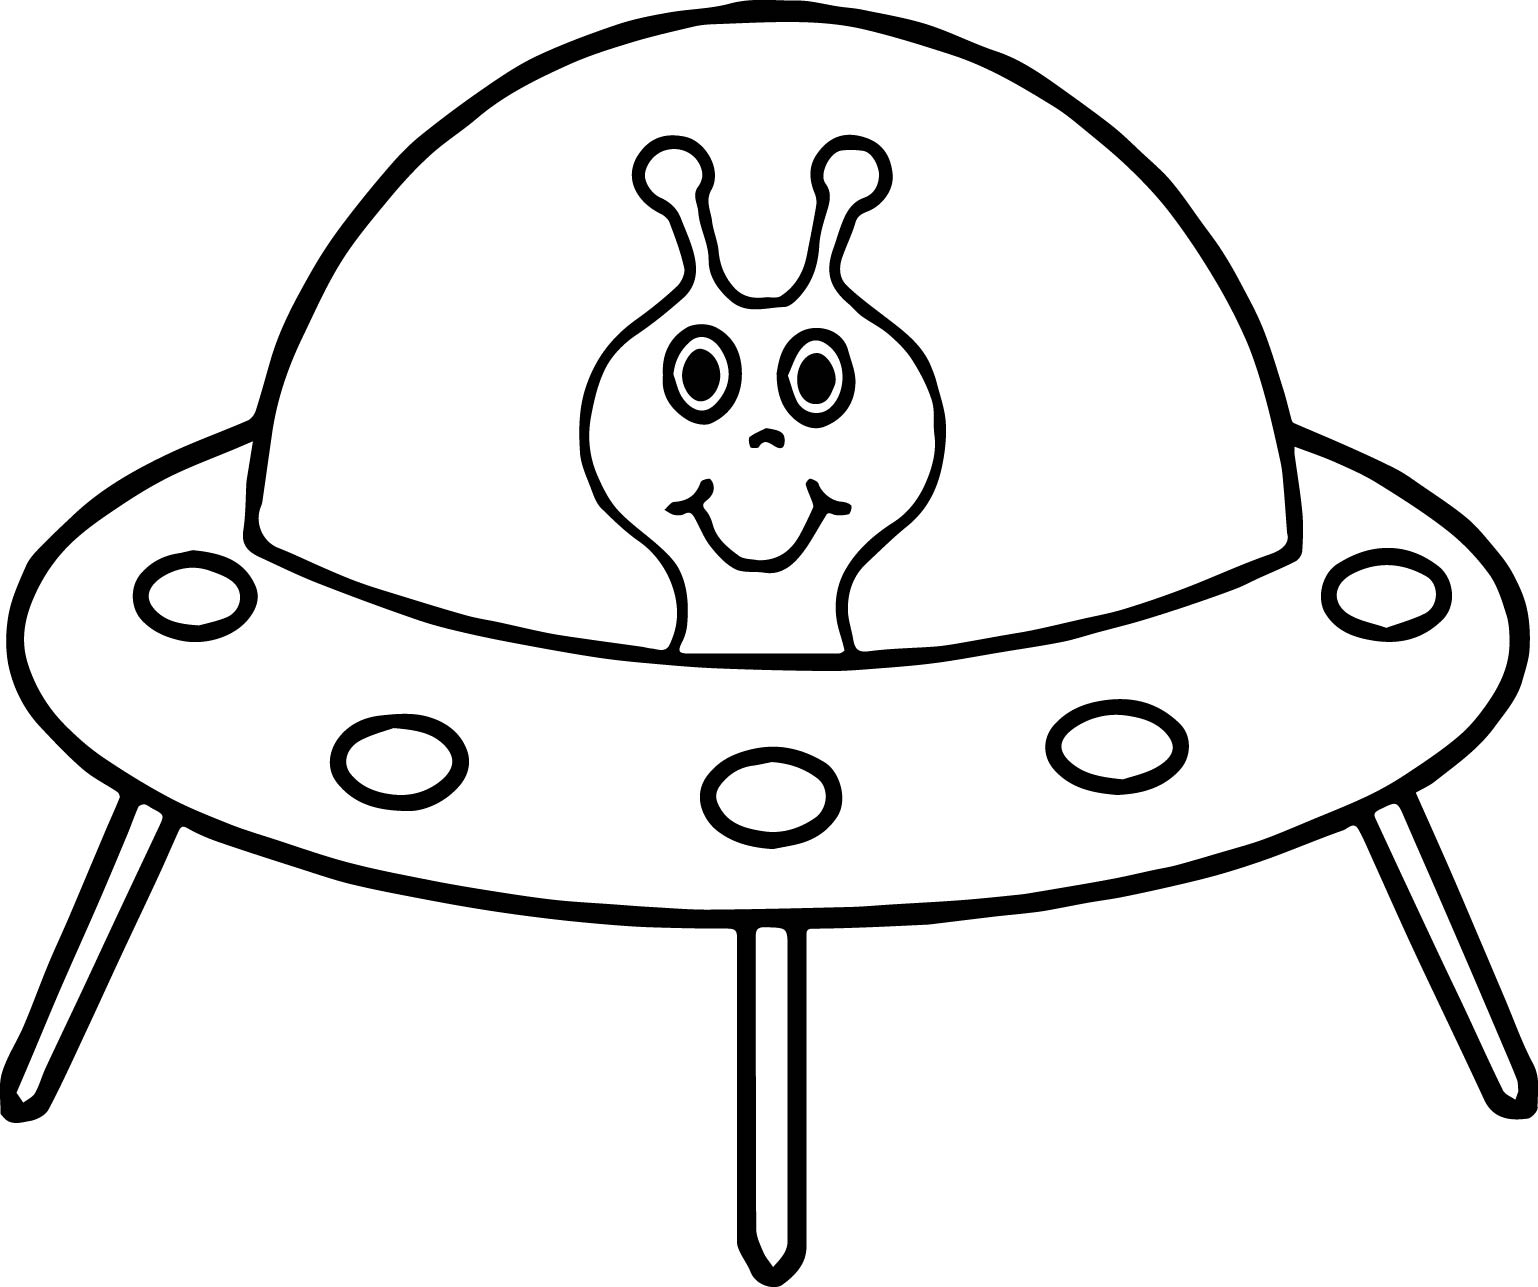 Space Ship Coloring Pages at GetDrawings | Free download